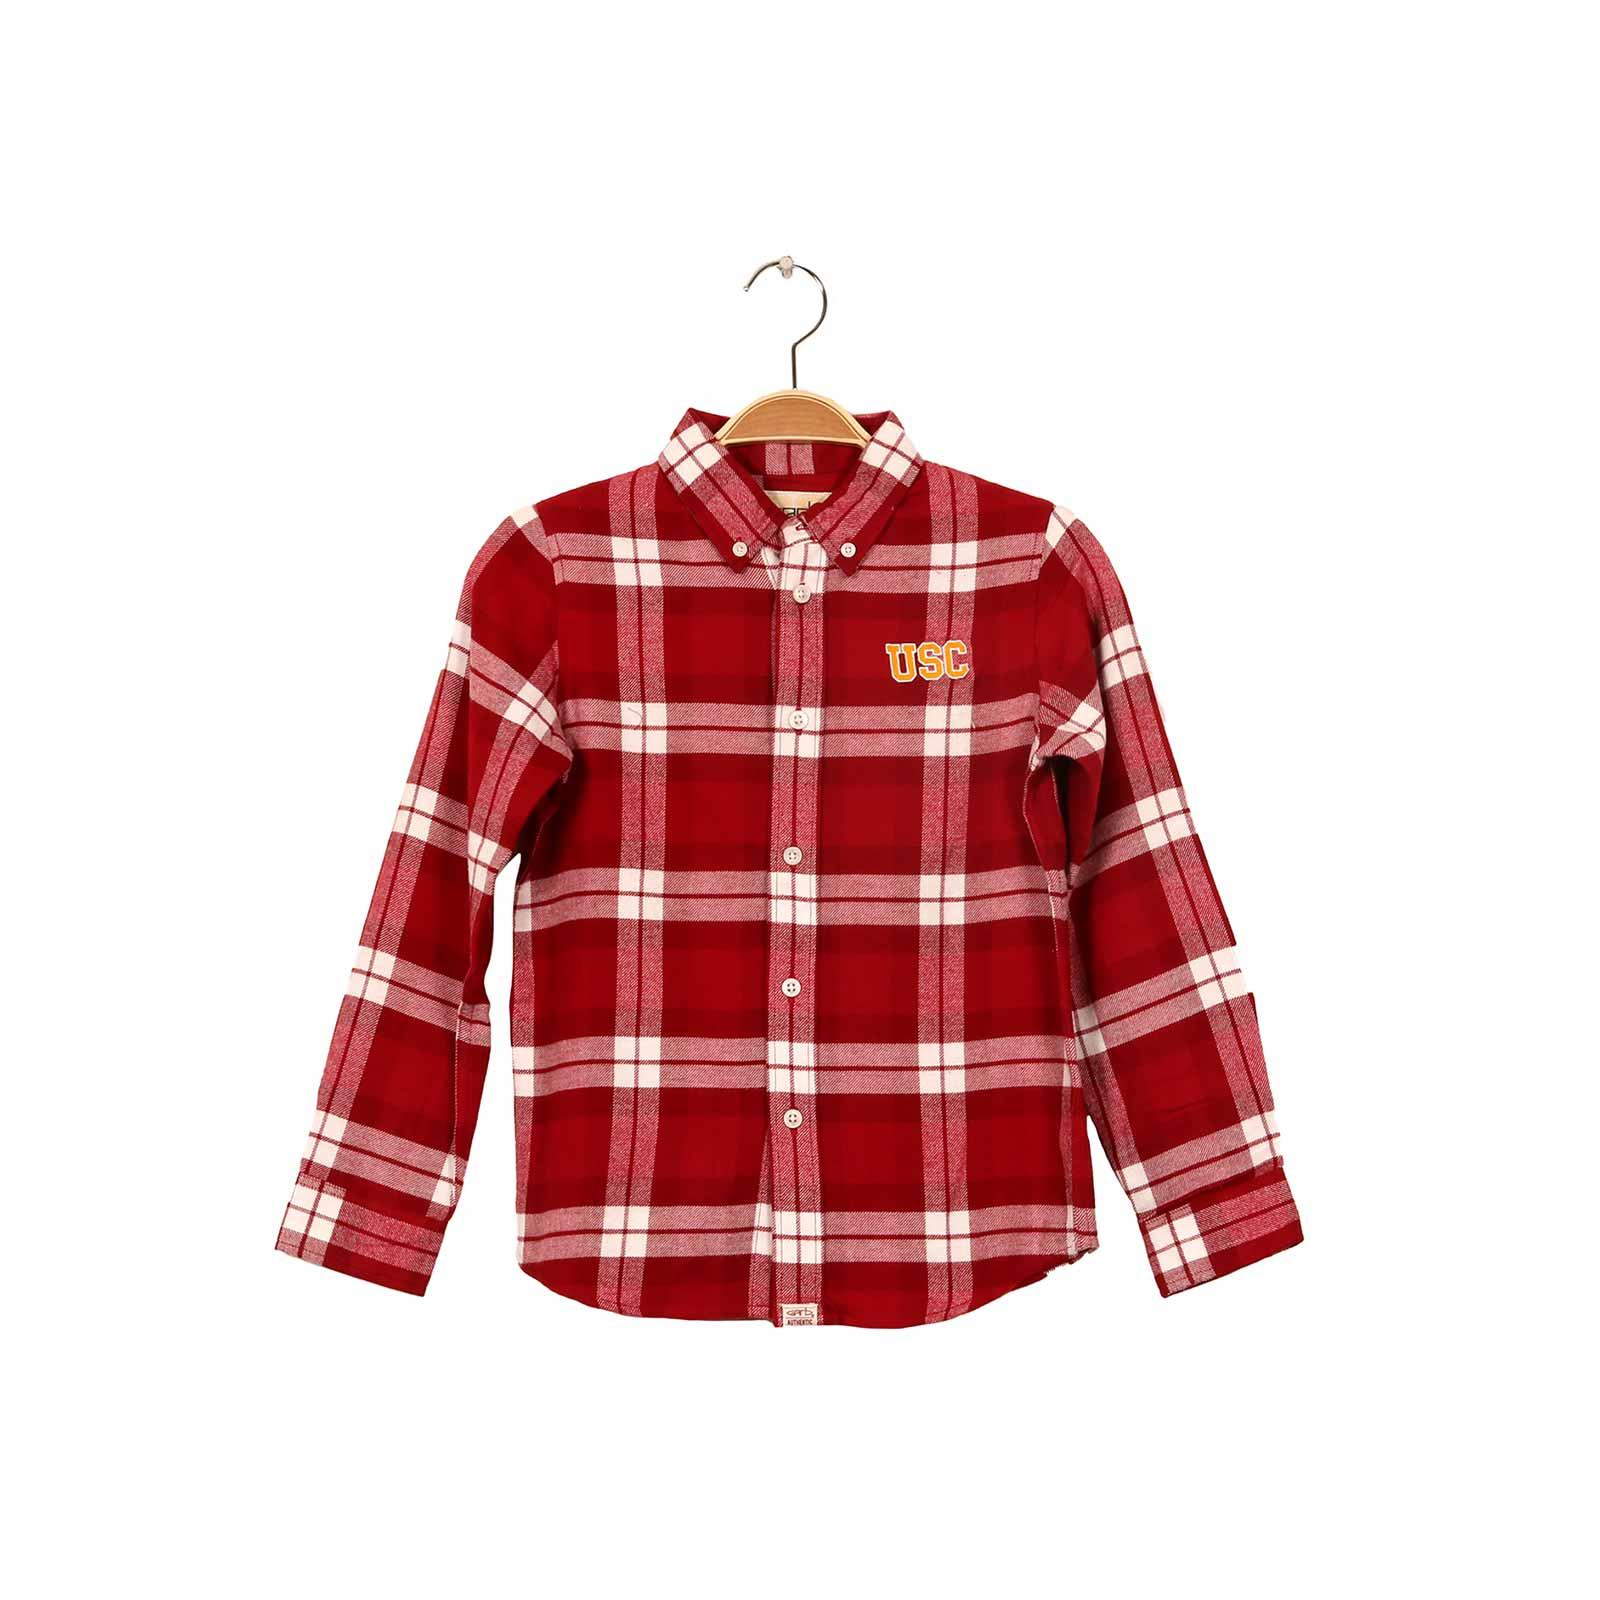 USC Toddler Hans Flannel Button Down F18 image01